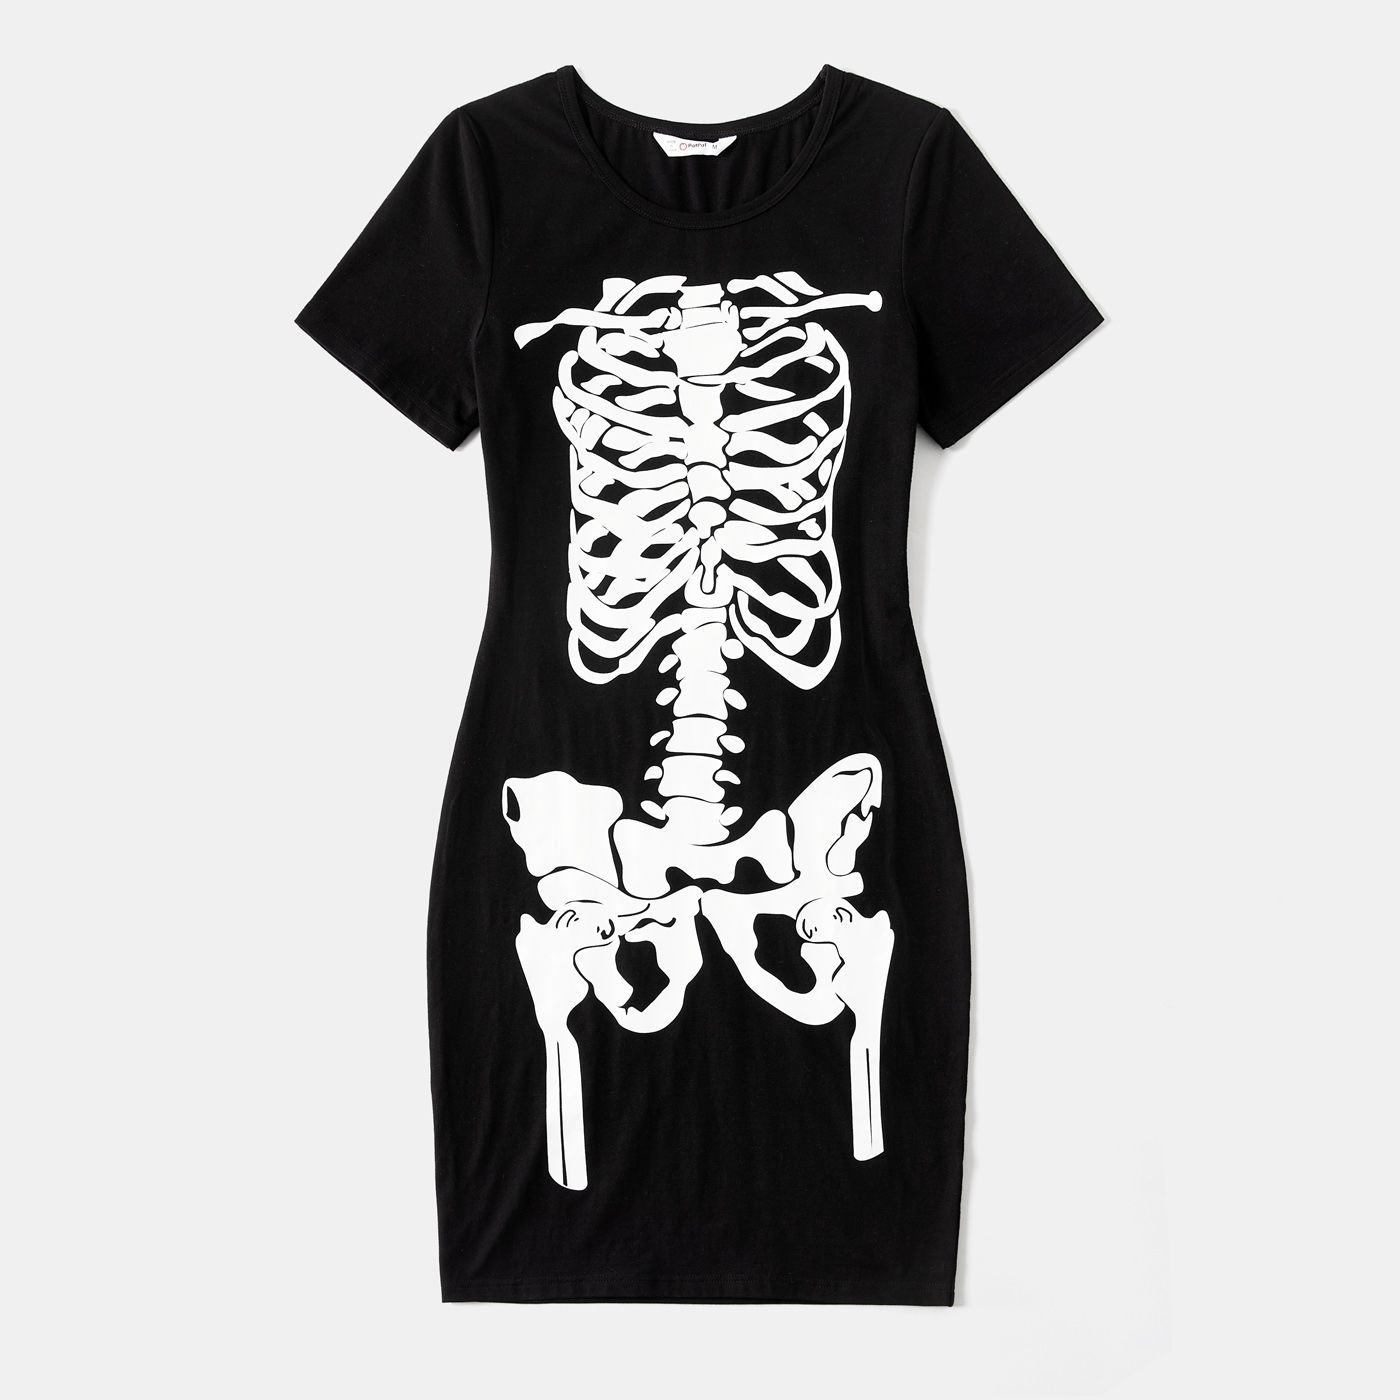 Halloween Glow In The Dark Skeleton Print 95% Cotton Short-sleeve Black Bodycon T-shirt Dress For Mom And Me